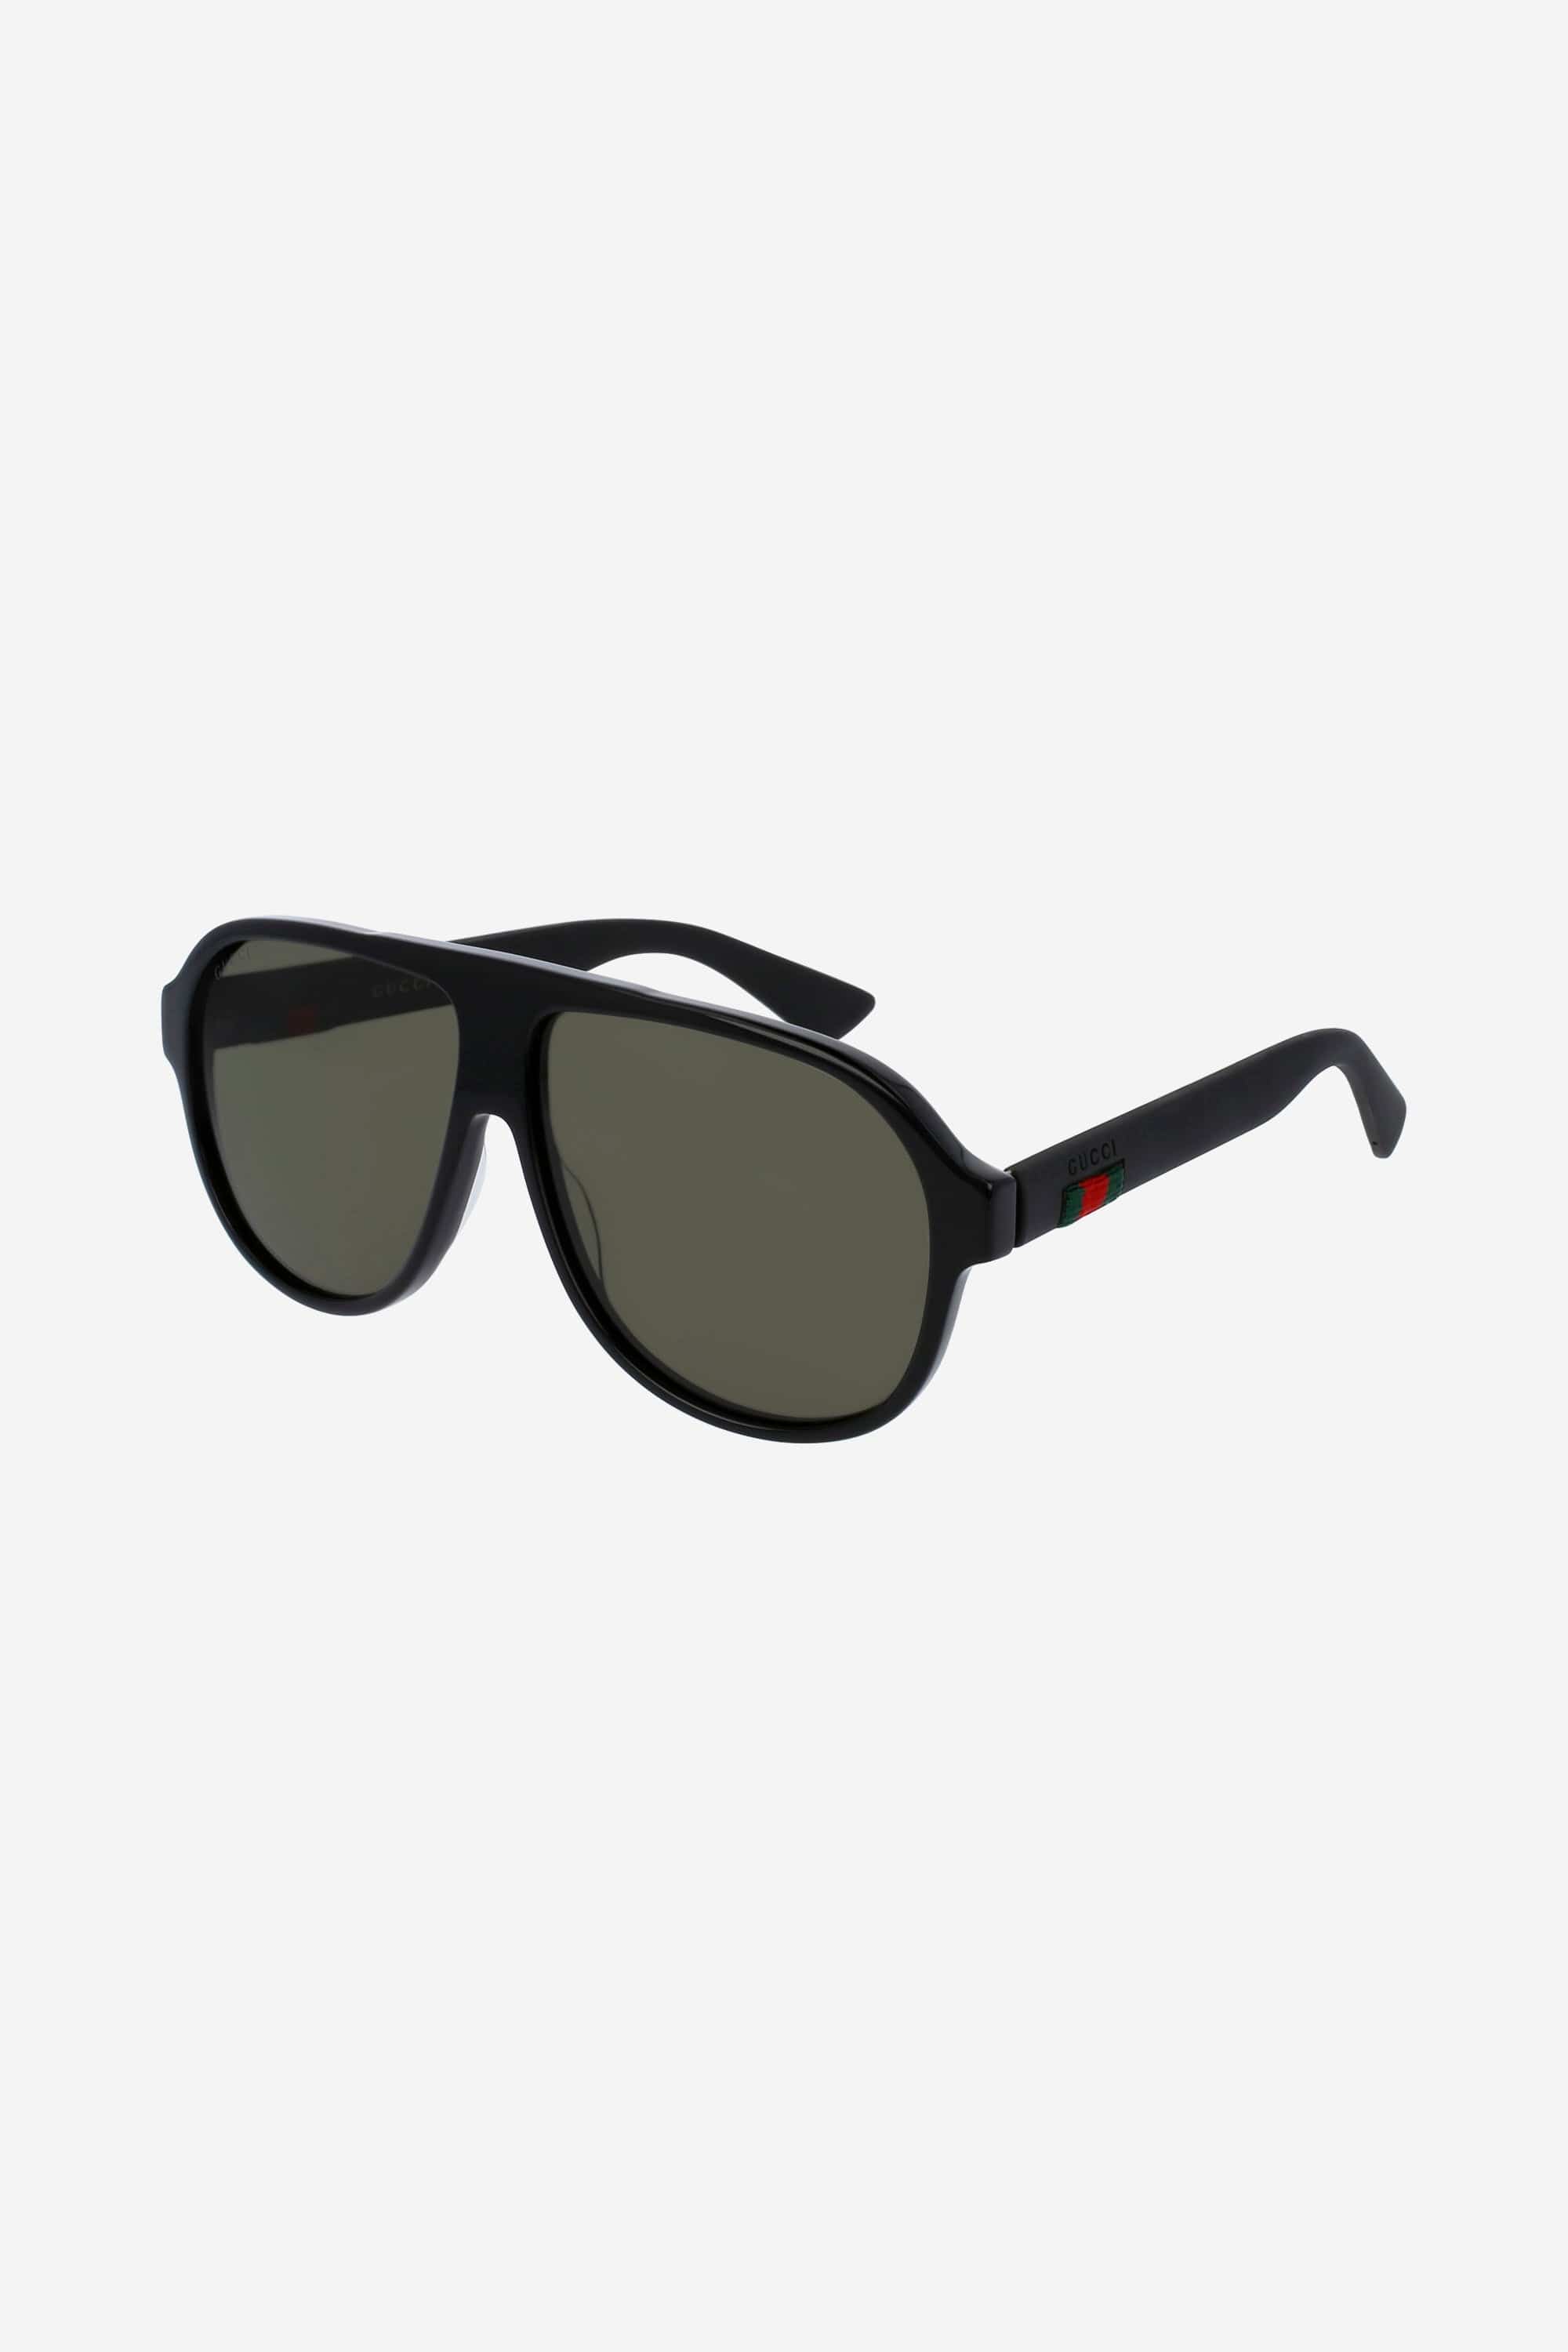 Gucci acetate pilot style with rubber temples - Eyewear Club